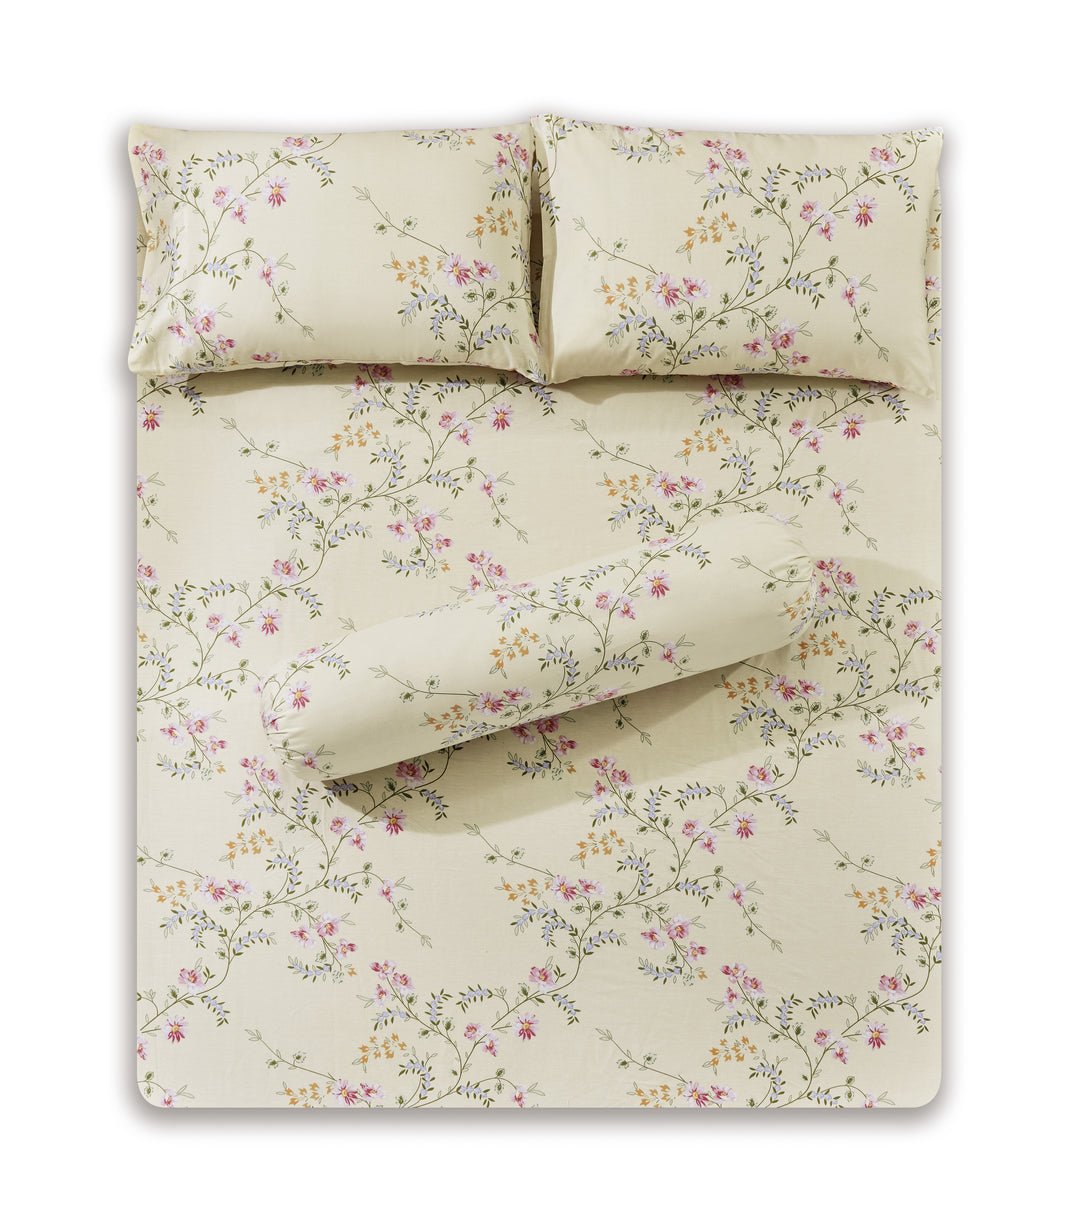 Contempo Anya 100% Cotton Fitted Sheet Set